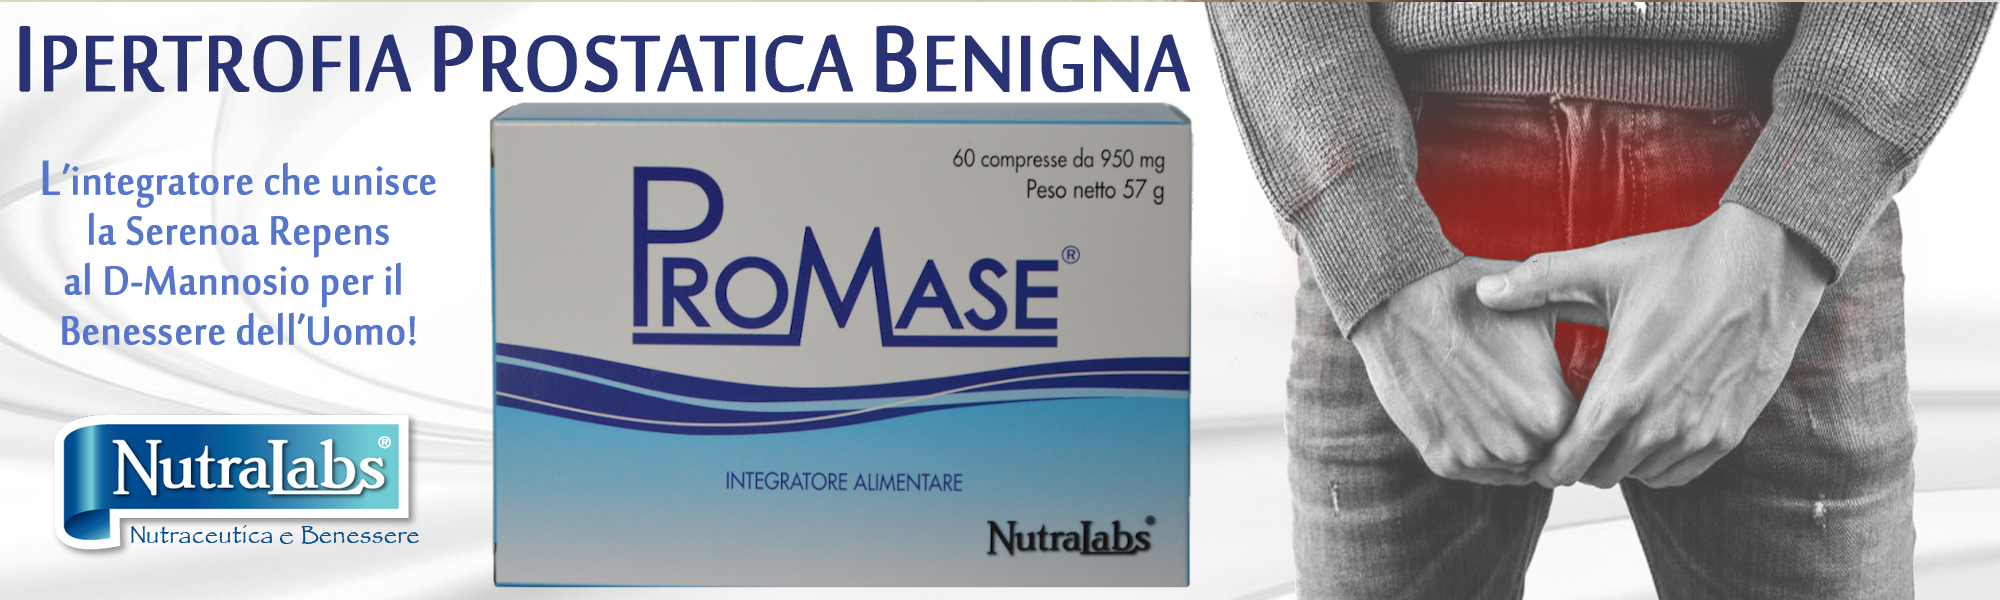 Promase nutralabs